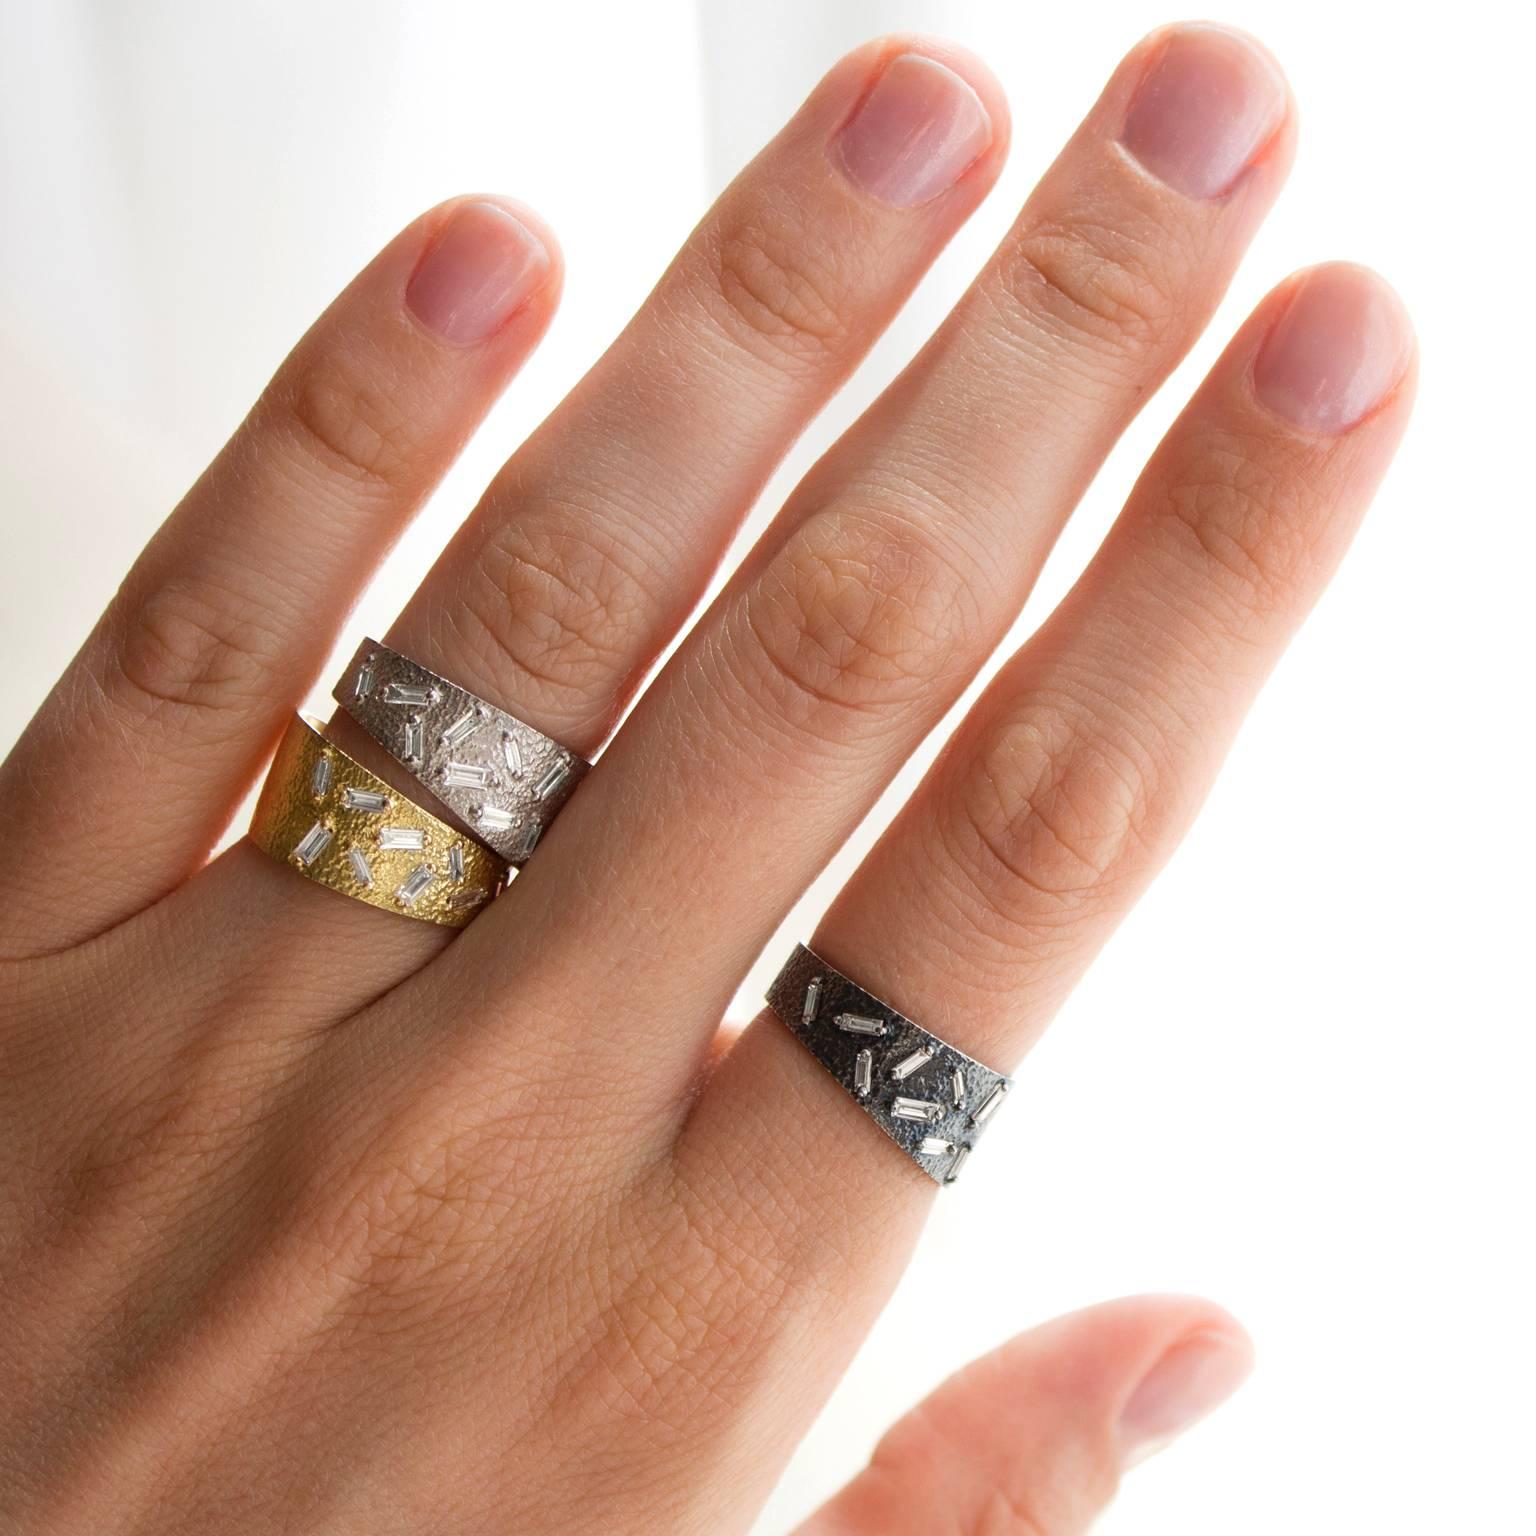 Curved Stacking Band Rings handcrafted in 18k yellow gold and oxidized sterling silver with 18 white diamond baguettes totaling 0.5596 carats set with polished double prongs. Price includes both rings, but each can be purchased